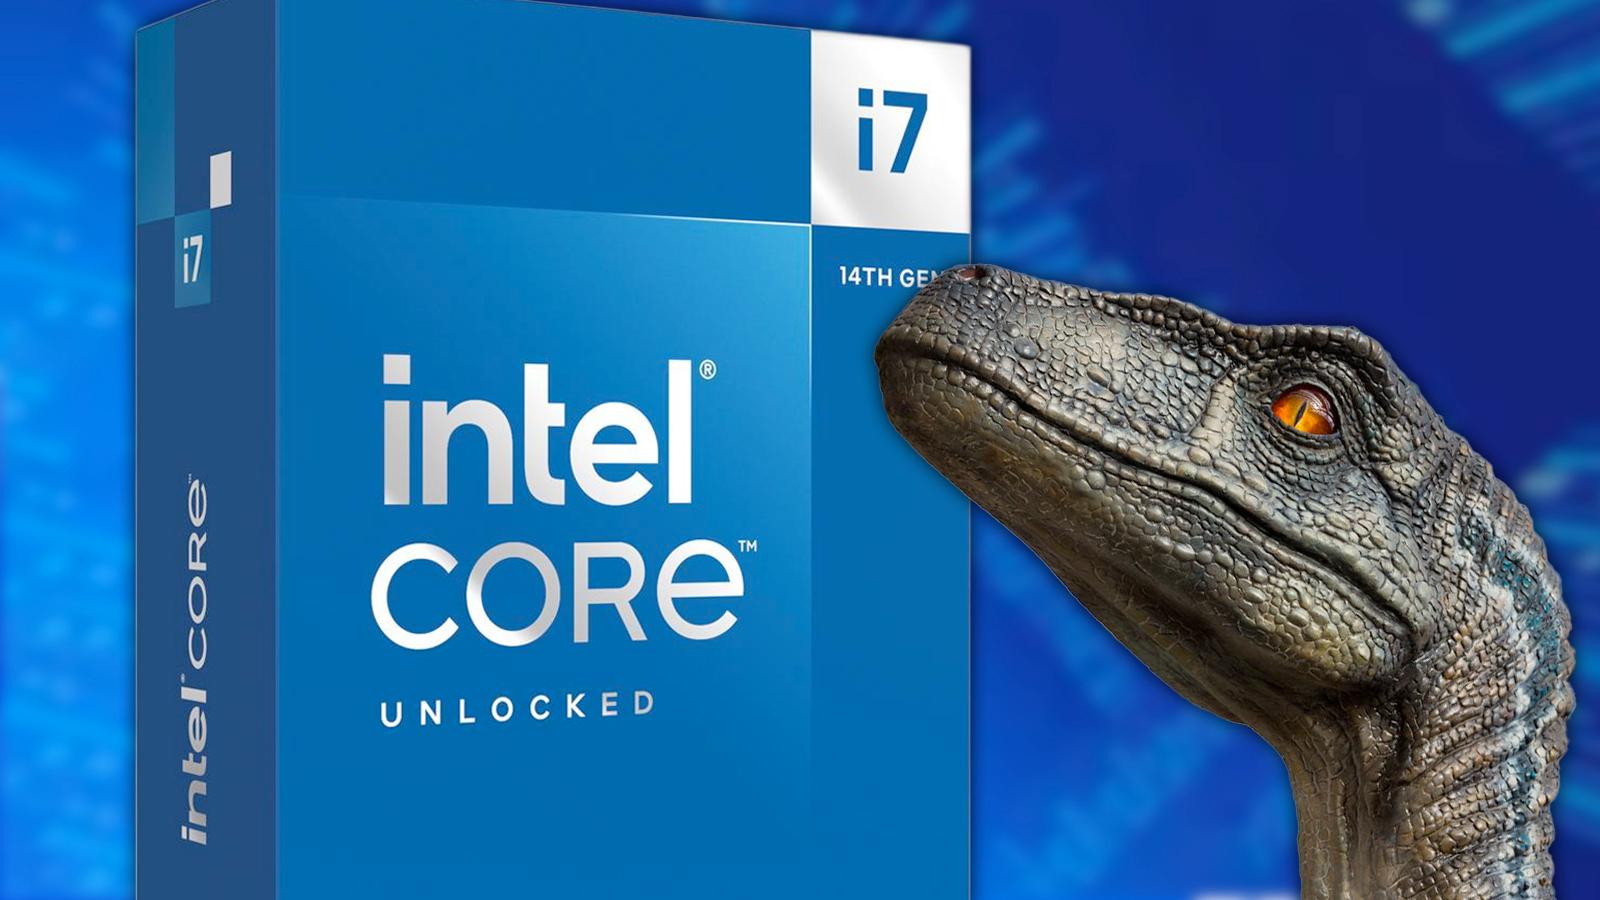 Where to buy the Intel Core i7-14700K: Price, release date & more